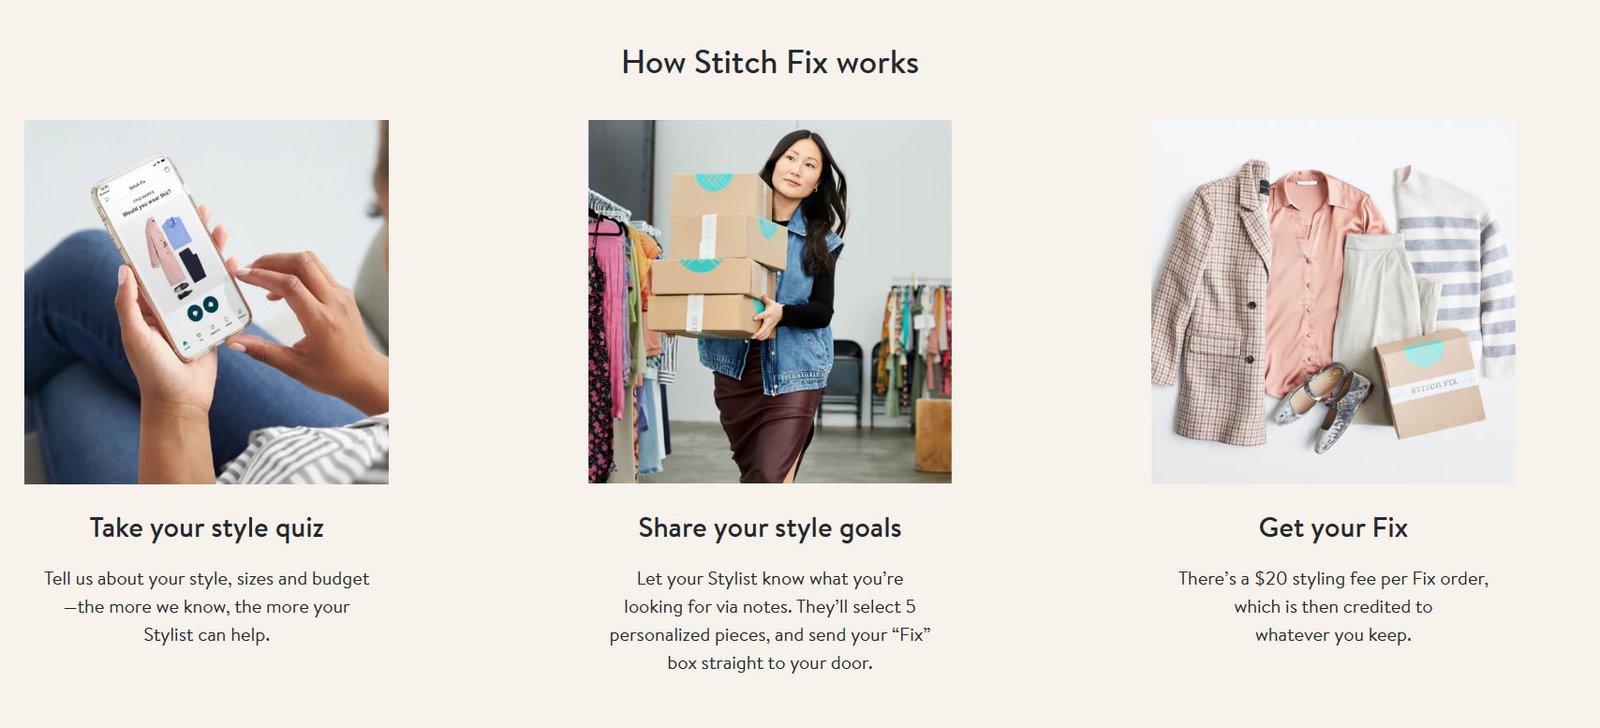 Stitch Fix uses human stylists to finalize the choices. 